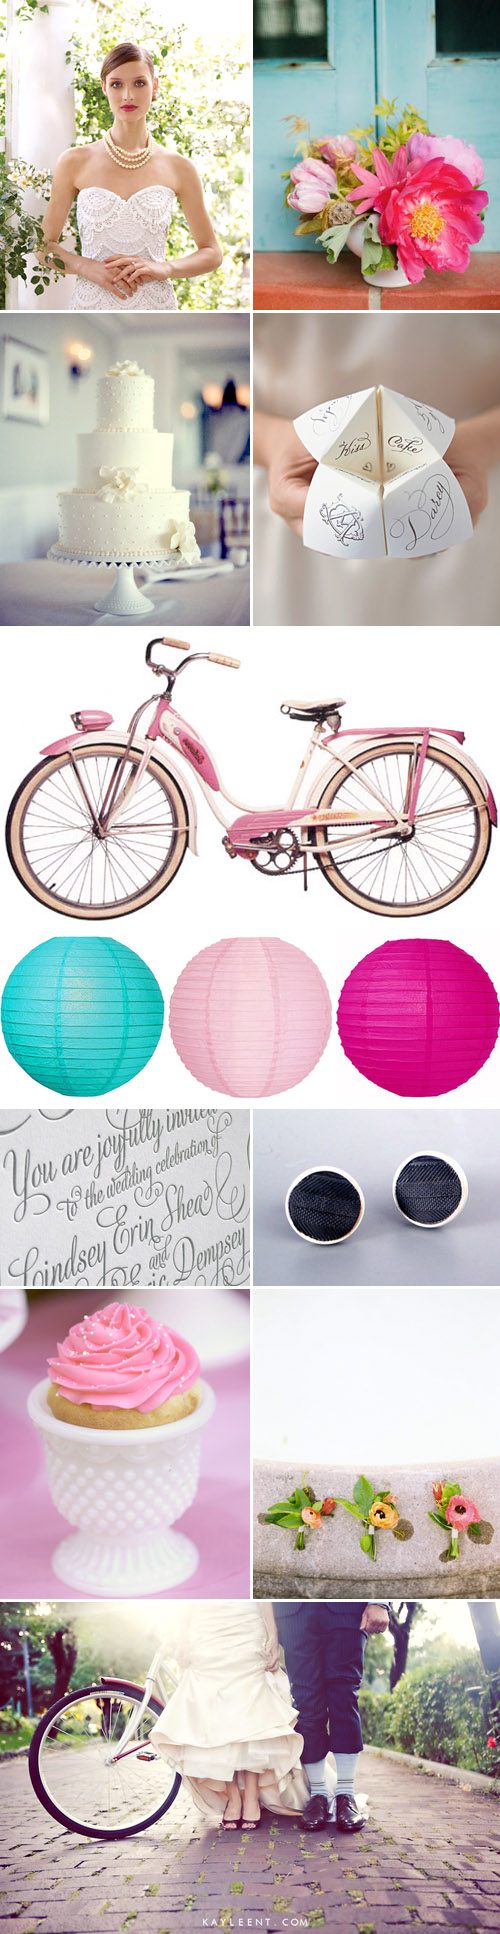 romantic and rustic vintage bicycle wedding inspiration board, petal pink and turquoise blue wedding color palette